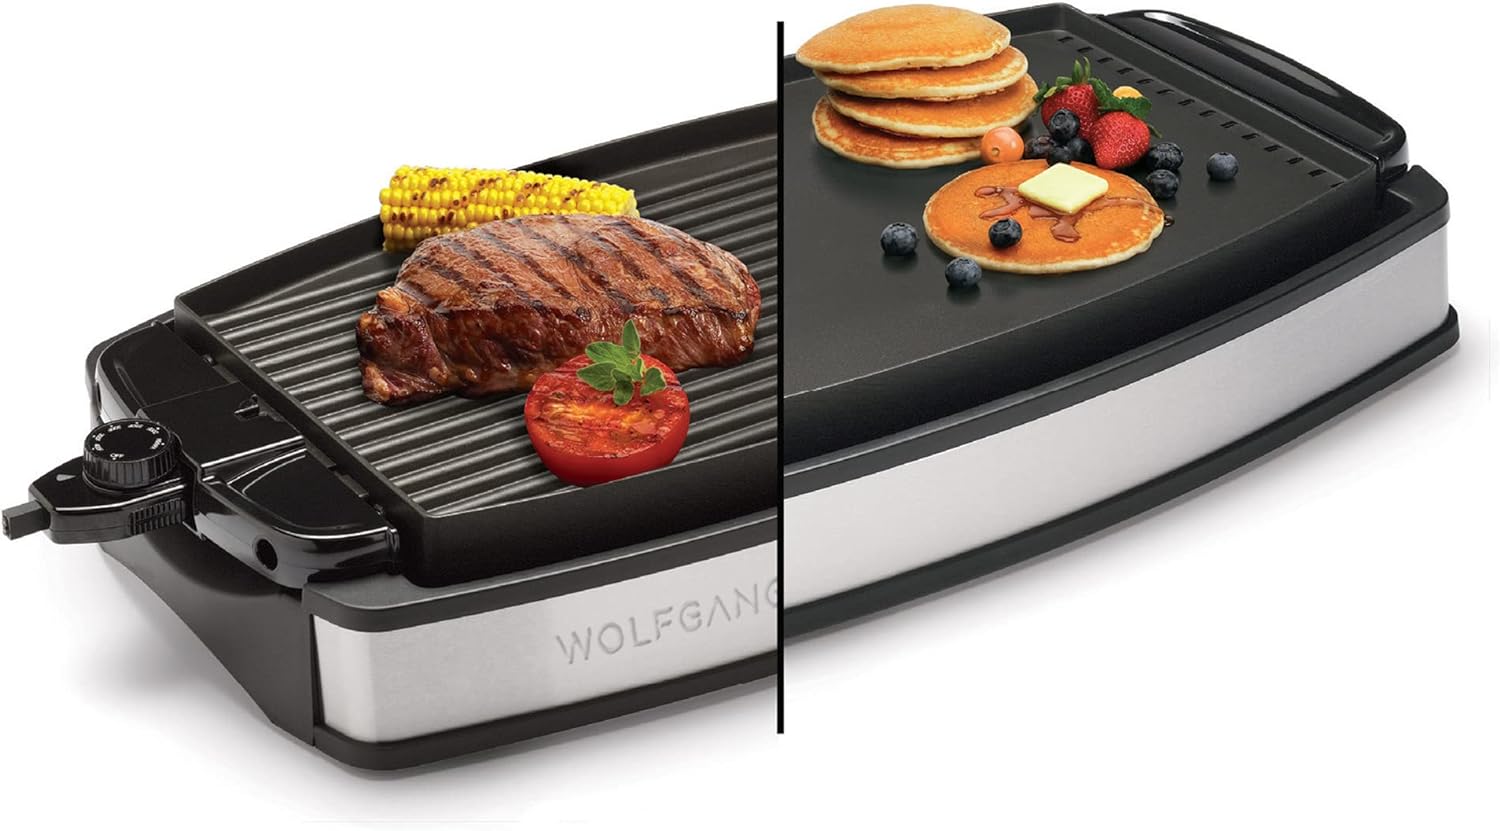 Wolfgang Puck XL Reversible Grill Griddle Review